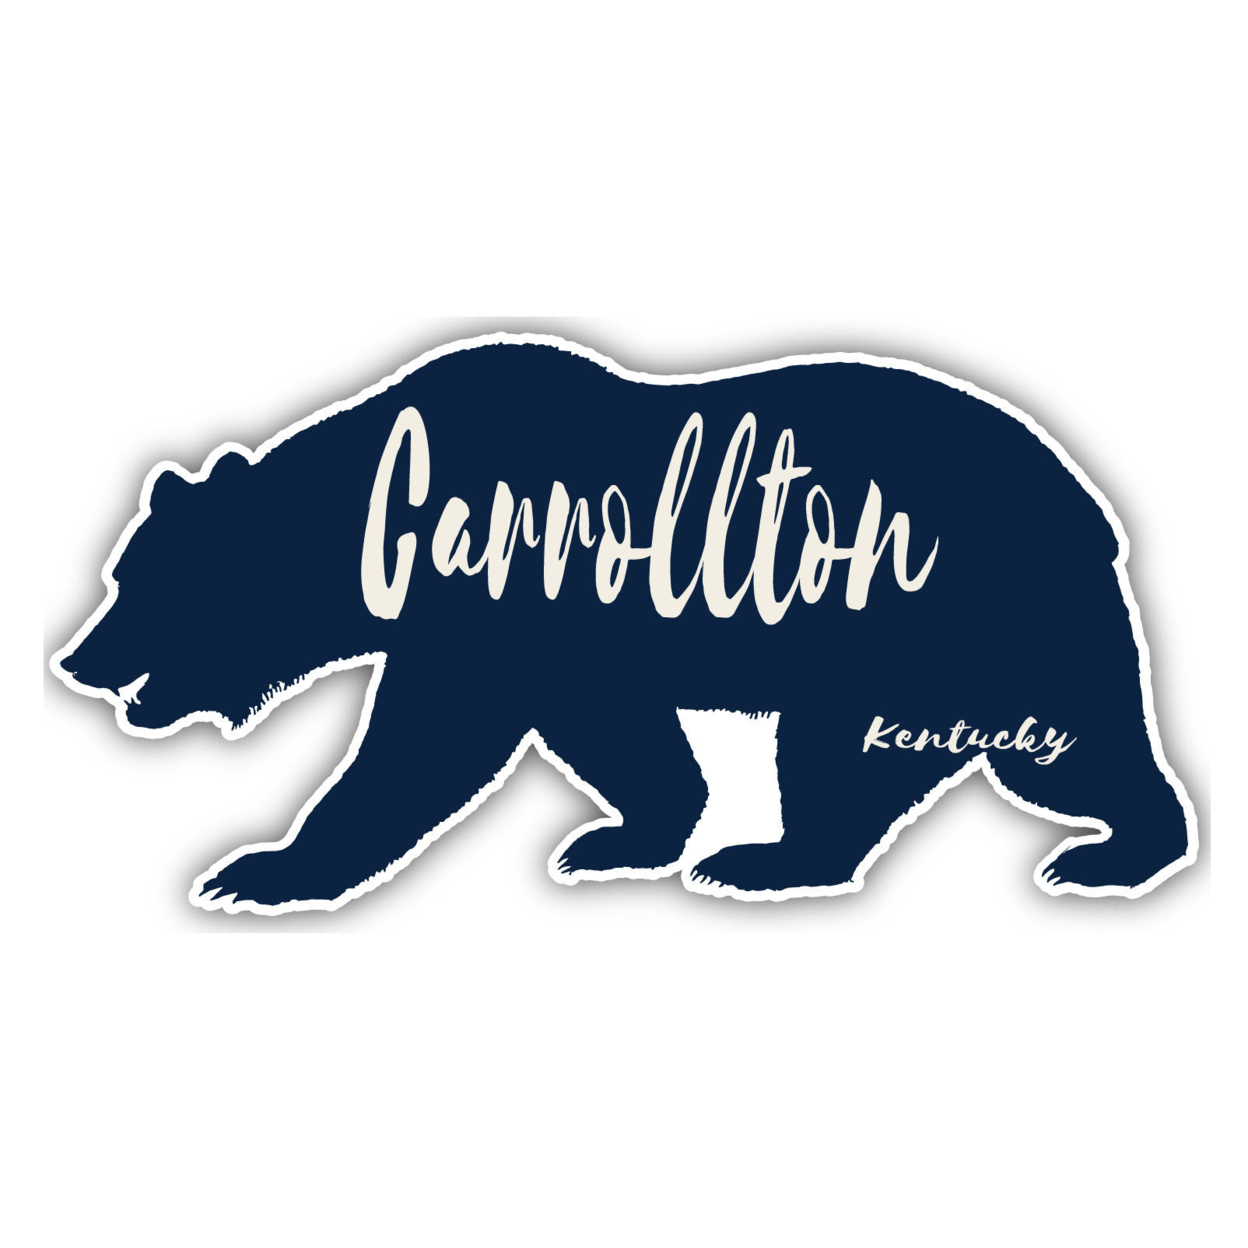 Carrollton Kentucky Souvenir Decorative Stickers (Choose Theme And Size) - 4-Pack, 4-Inch, Great Outdoors